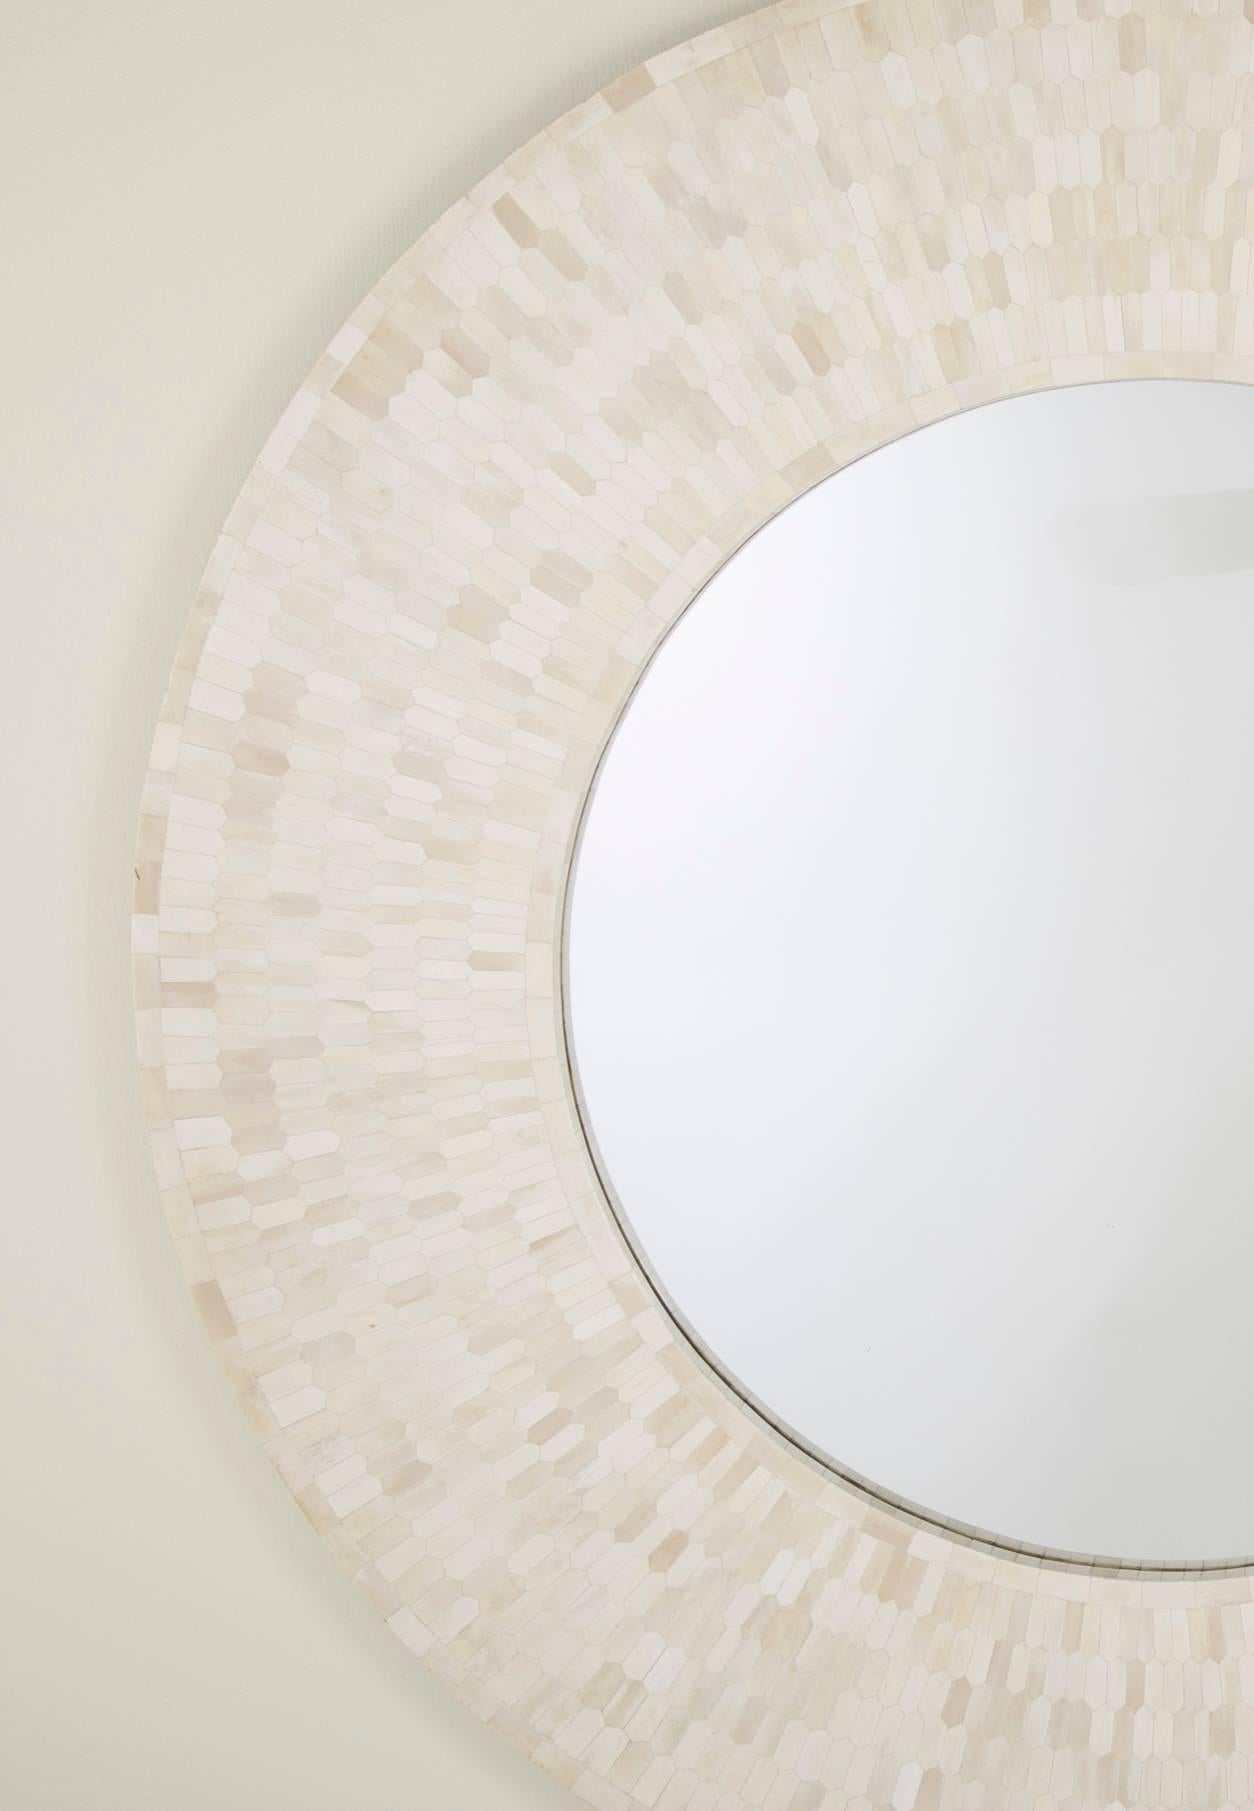 Stunning round mirror of tessellated bone designed by Enrique Garcel. The hexagonal and rectangular bone pieces of slightly variegated color adding texture and depth to this piece. 
The mirror has great scale at 48 inches diameter.